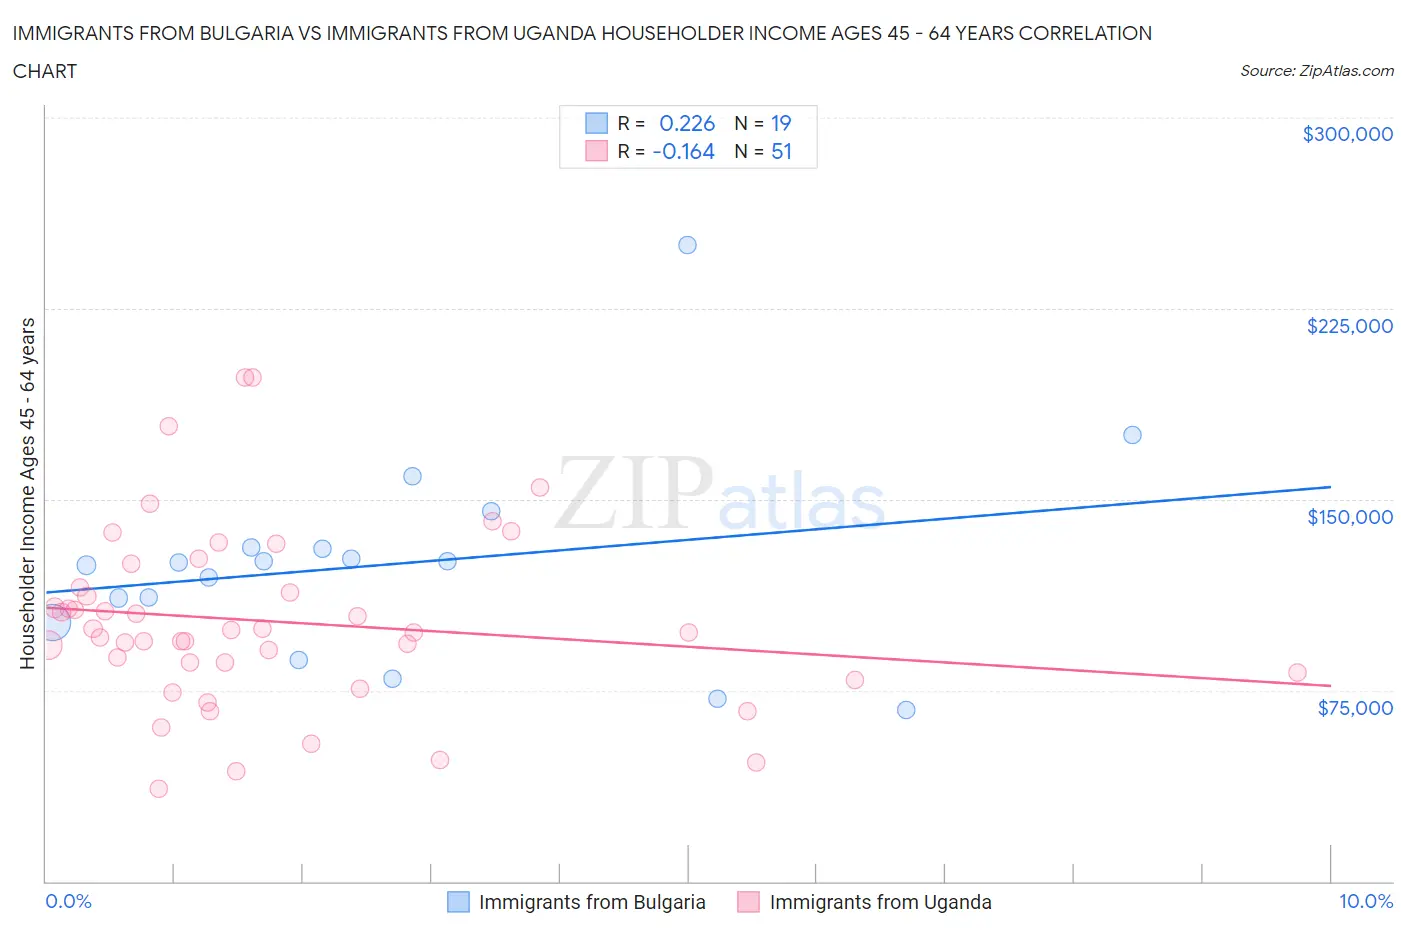 Immigrants from Bulgaria vs Immigrants from Uganda Householder Income Ages 45 - 64 years